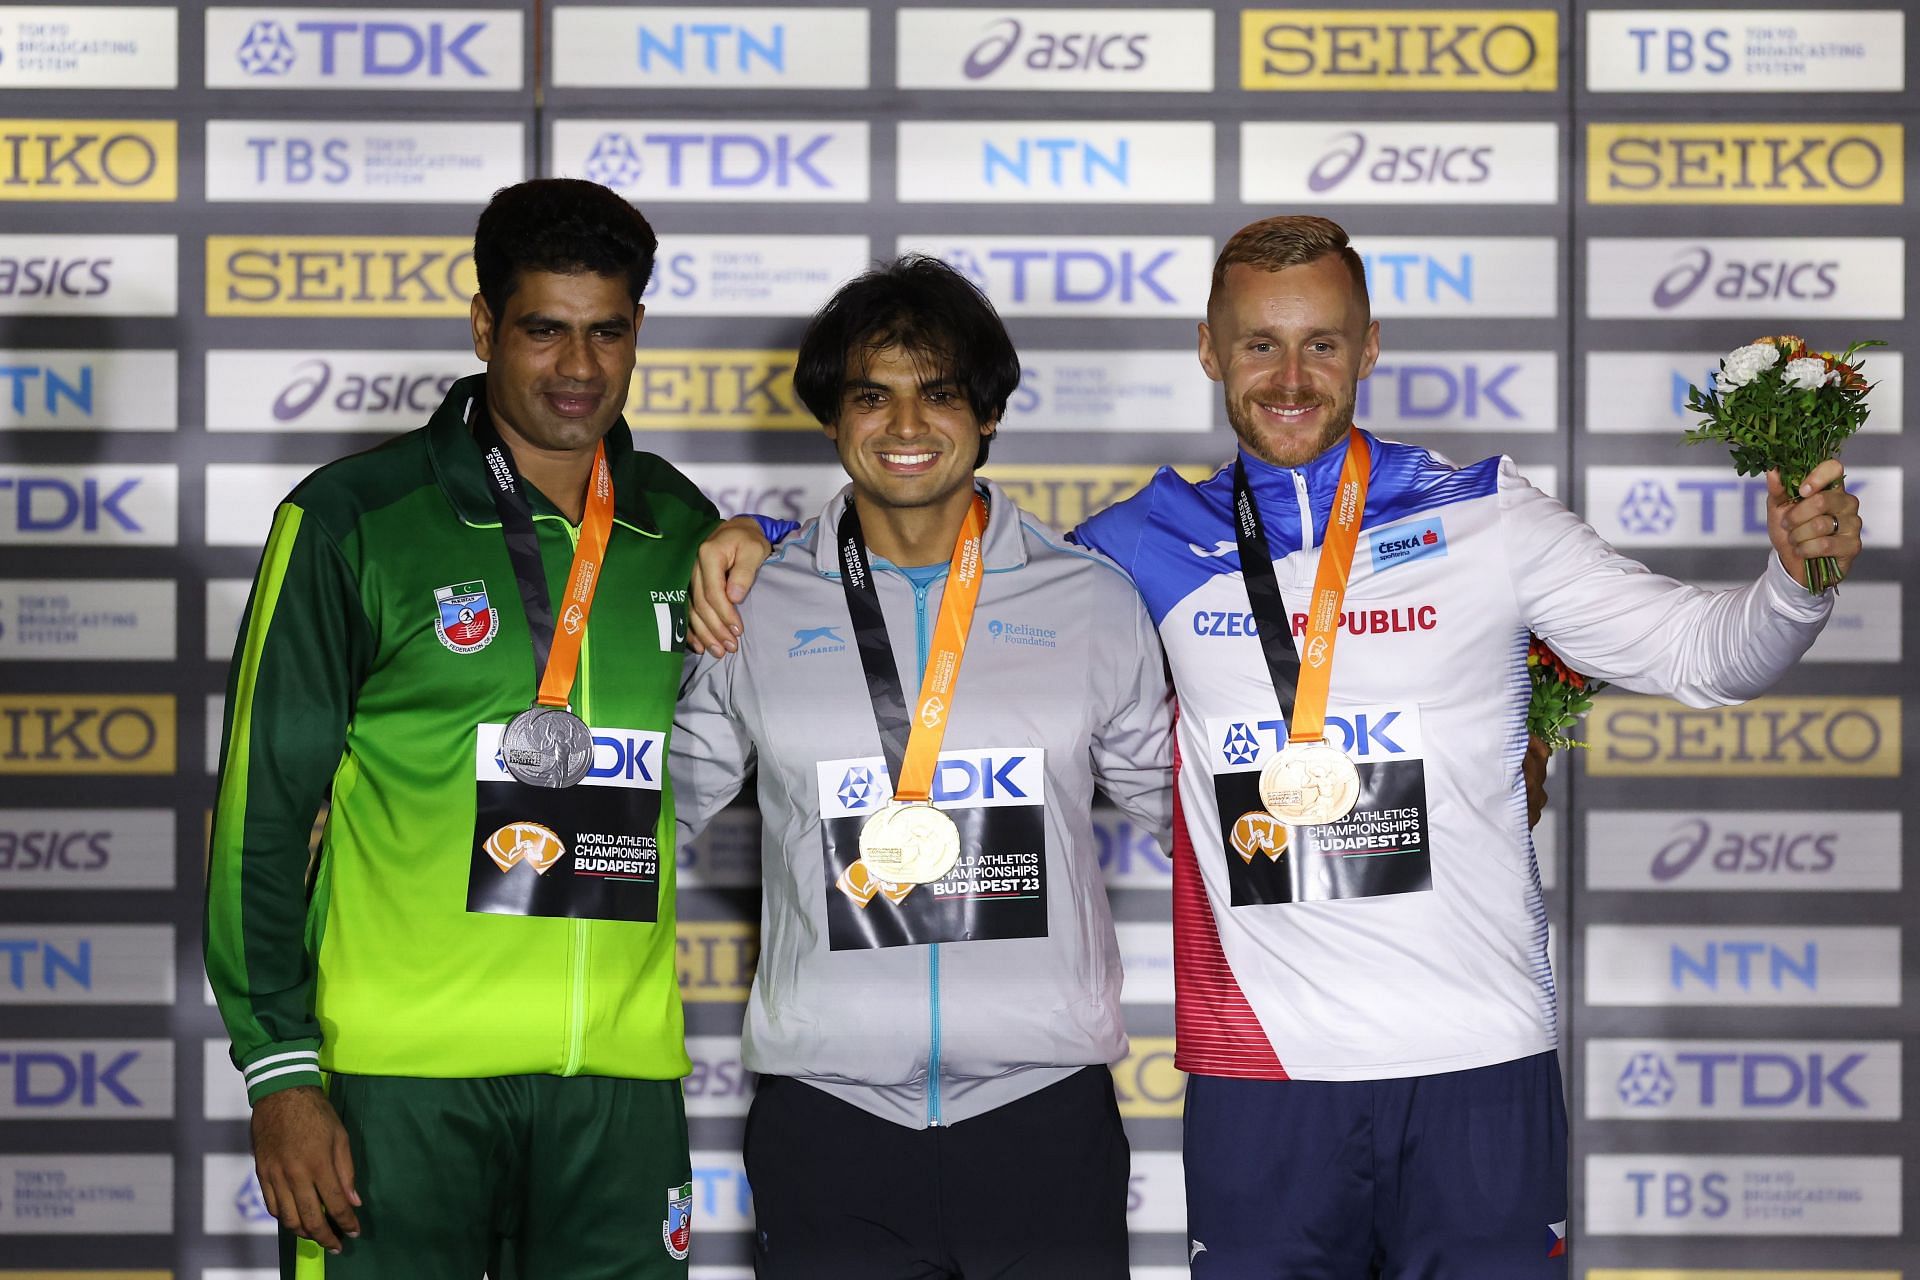 Silver medalist Arshad Nadeem of Team Pakistan, gold medalist Neeraj Chopra of Team India, and bronze medalist Jakub Vadlejch of Team Czech Republic during Day 9 of the 2023 World Athletics Championships 